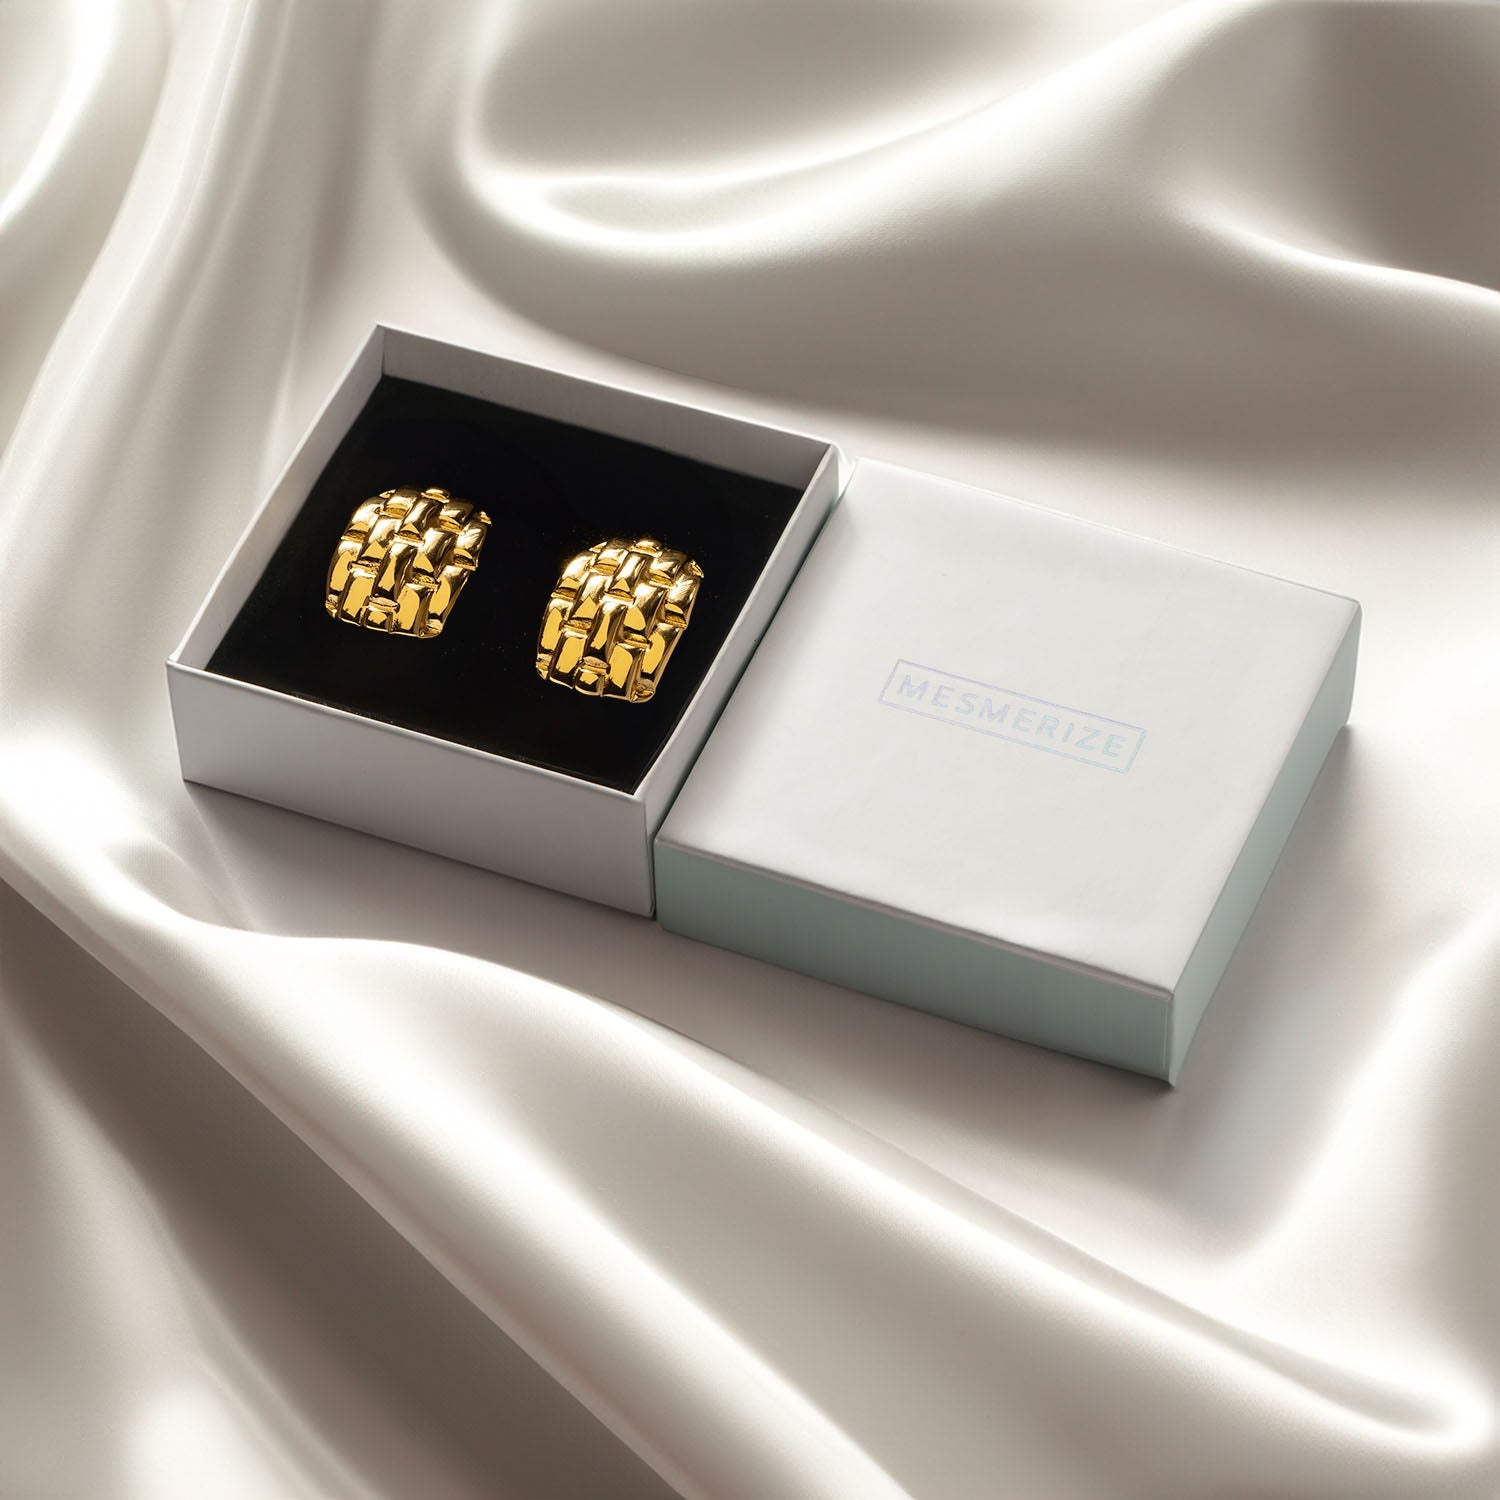 Sofia Quilted 18K Gold Stud Earrings